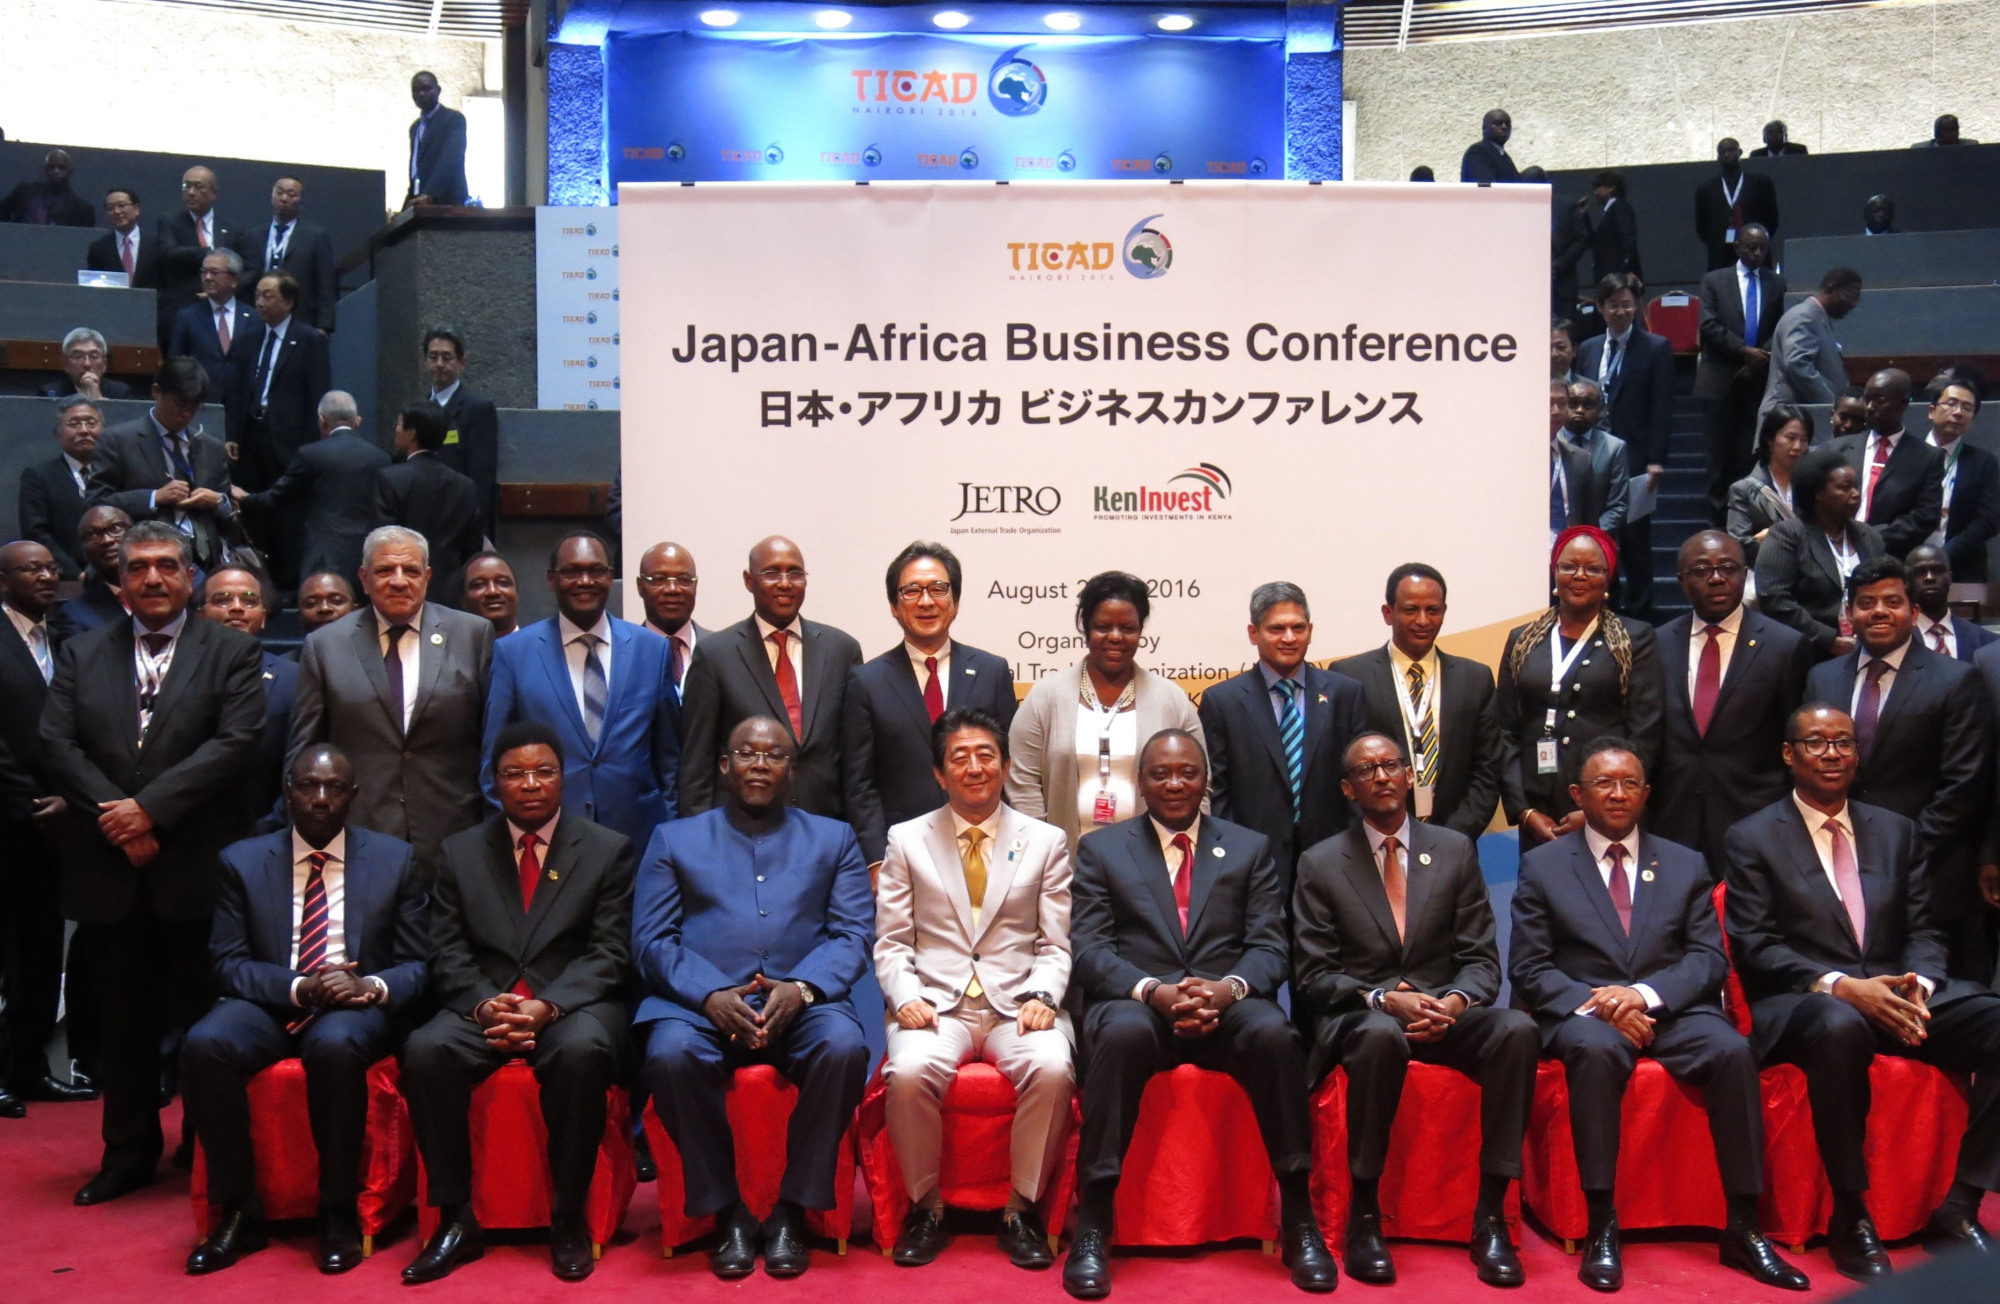 Leaders at the Japan-Africa Business Conference at The Sixth Tokyo International Conference on African Development in Nairobi on Aug. 28, 2016 | JAPAN EXTERNAL TRADE ORGANIZATION